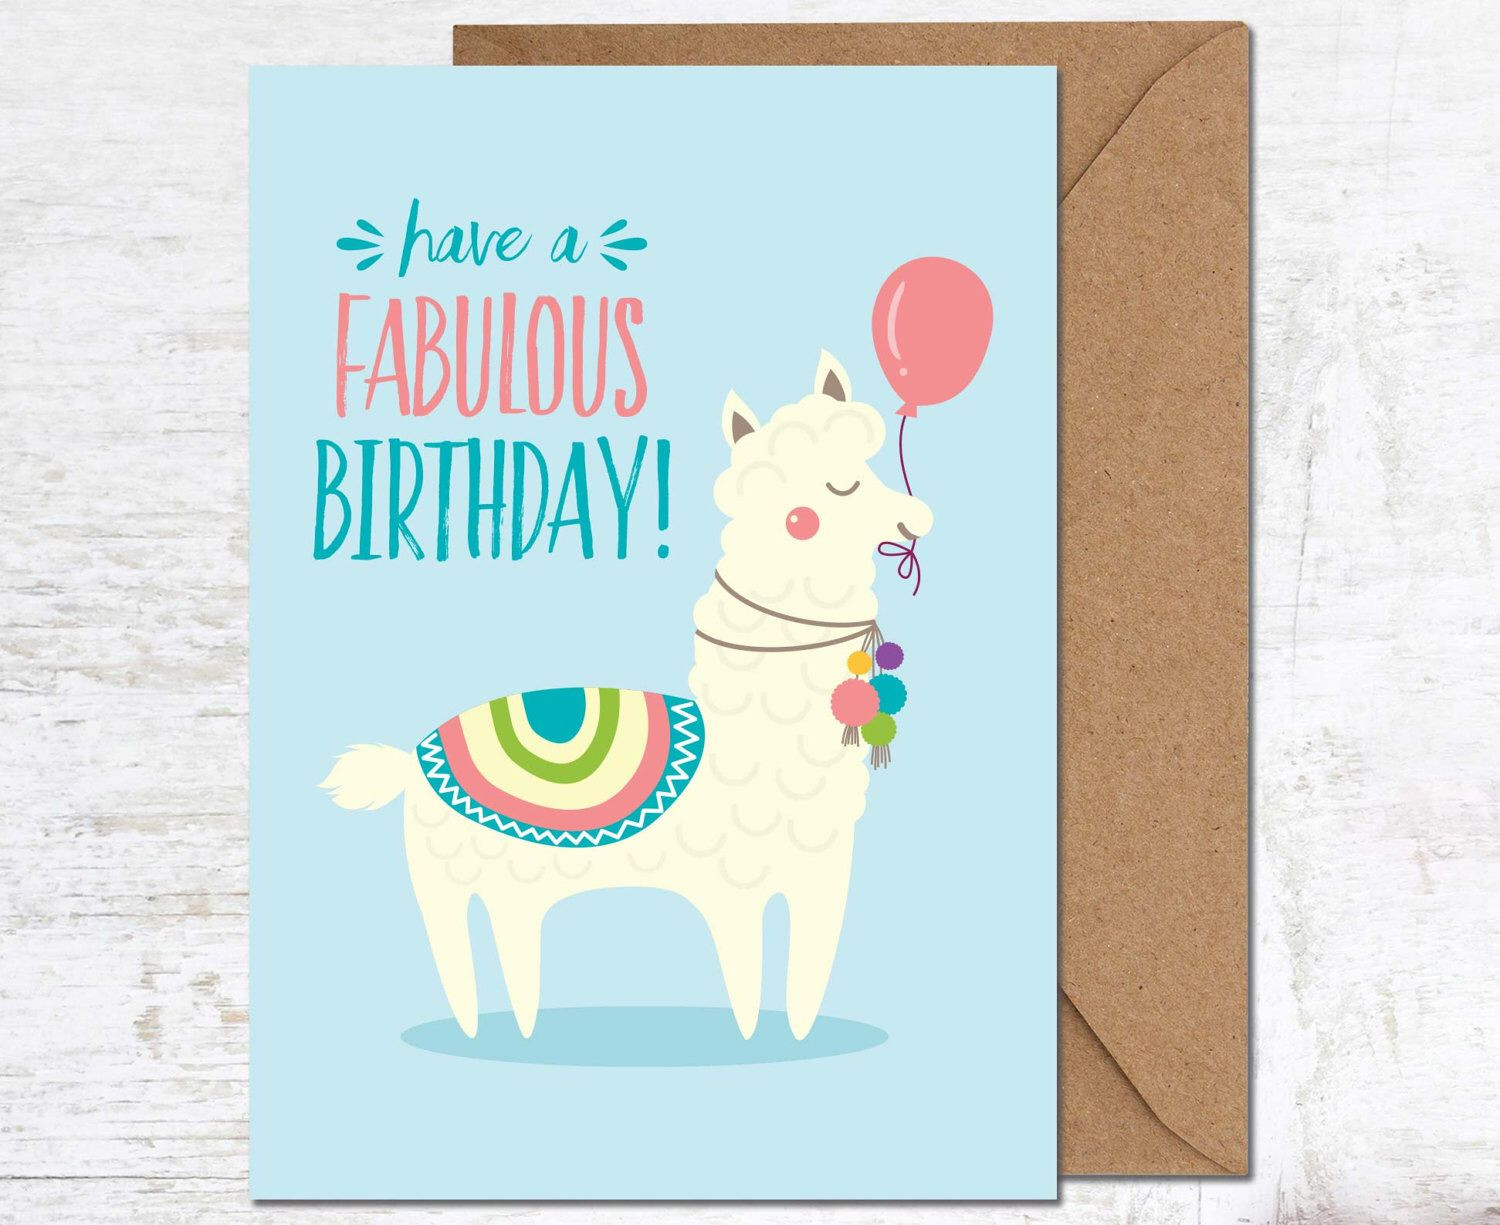 Cute Birthday Card
 Pin by Mandy DeVore on Kids party ideas